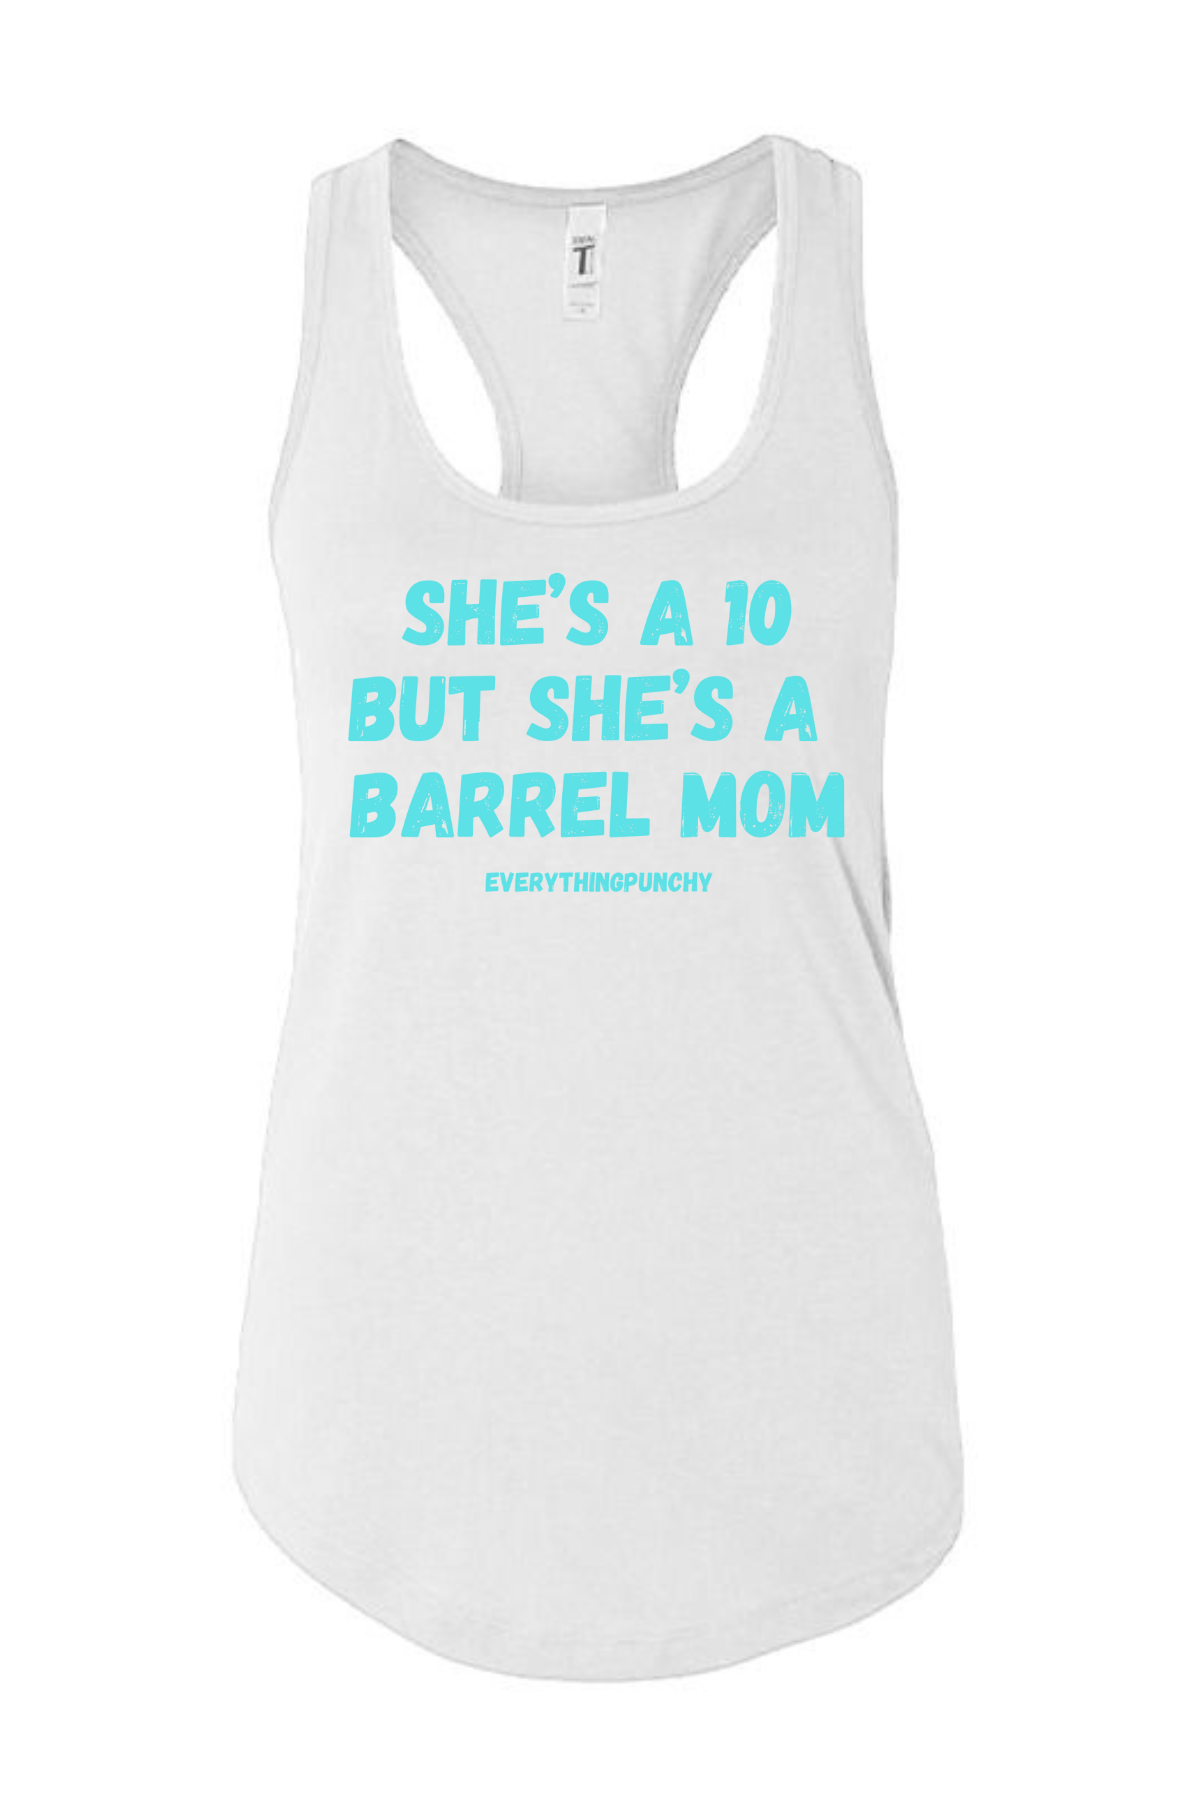 She's a 10 but she's a barrel mom tank top